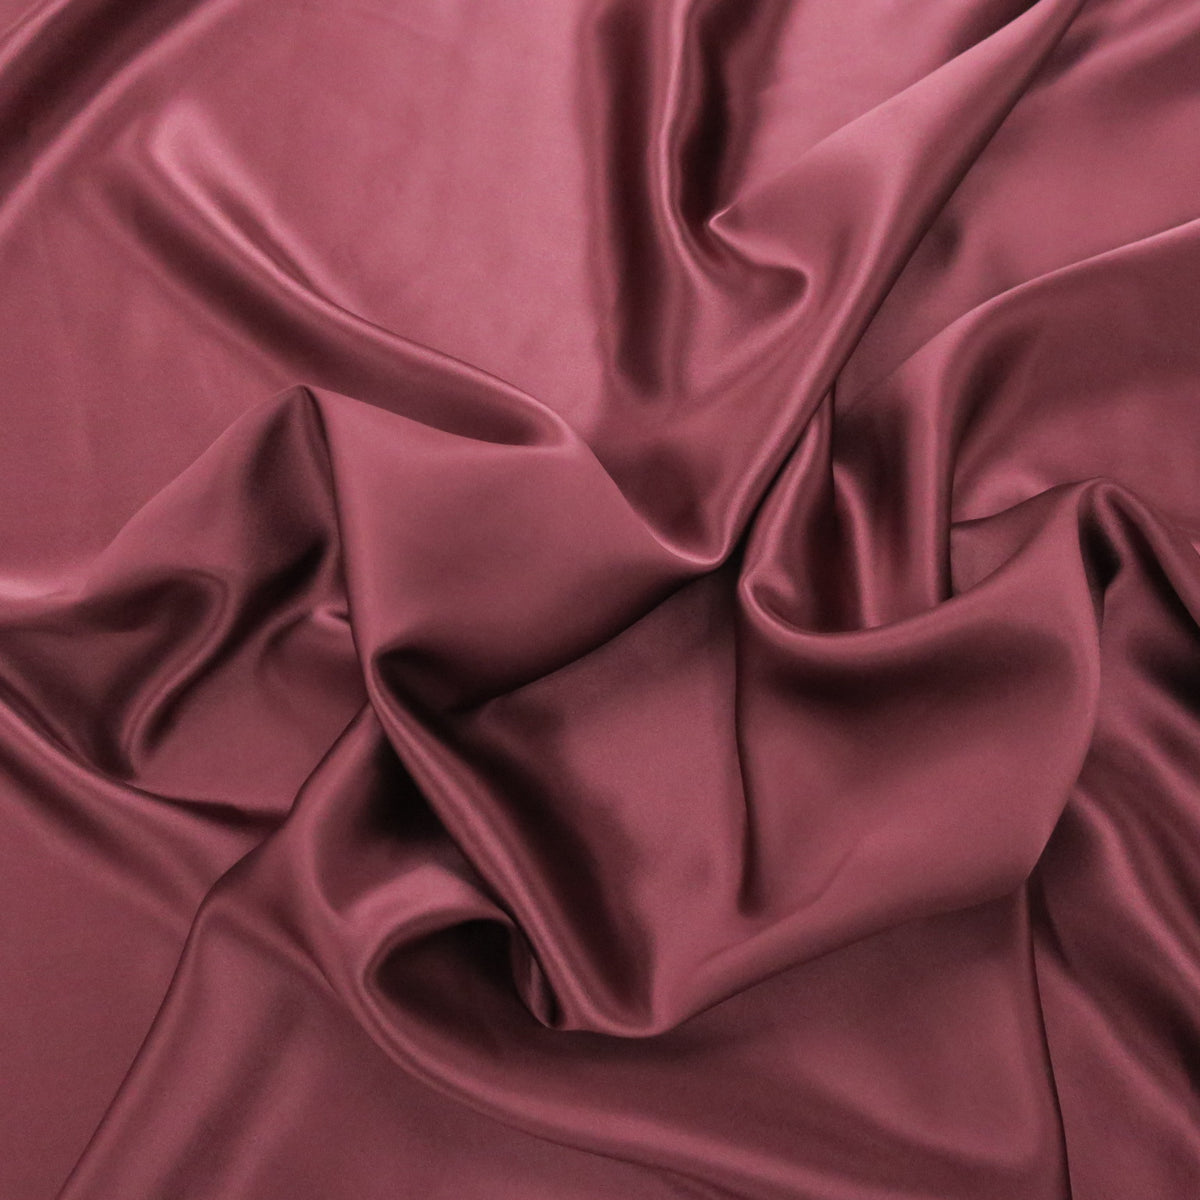 Pink 100% Pure Silk Fabric Charmeuse Fabrics by The Pre-Cut 1 Yard